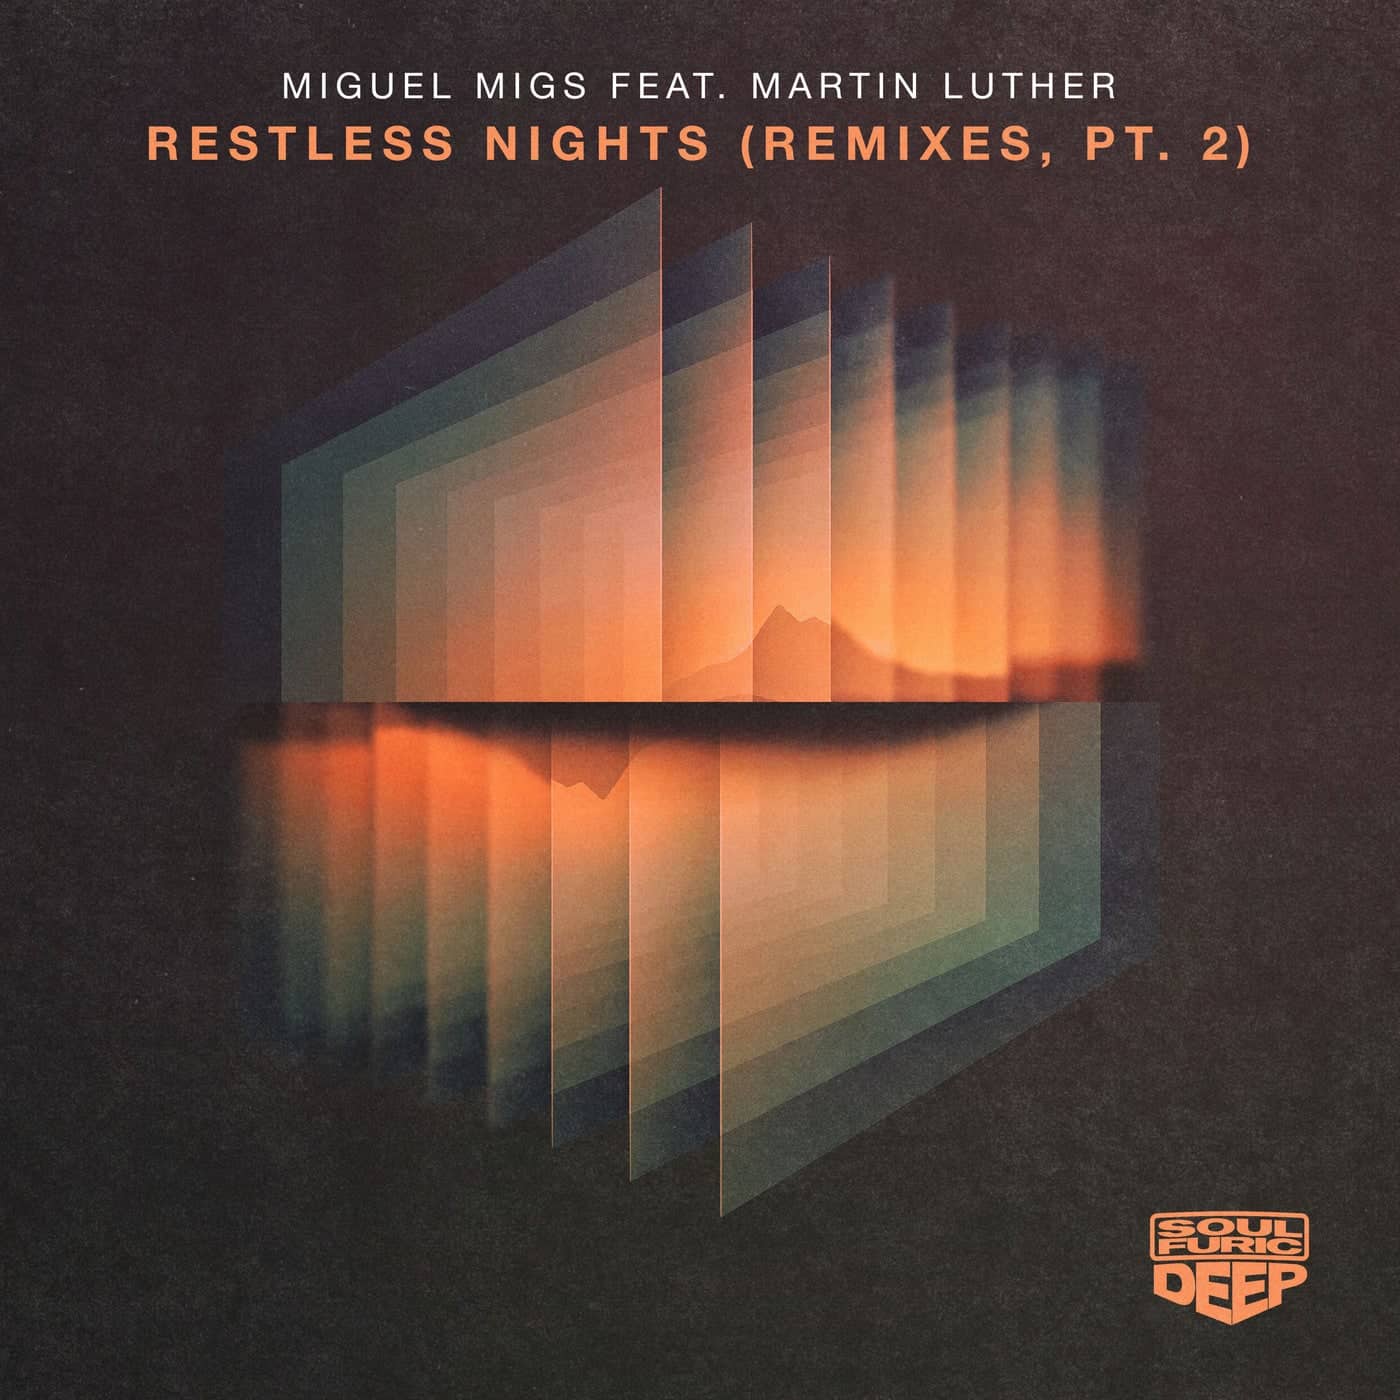 image cover: Miguel Migs, Martin Luther - Restless Nights - Remixes, Pt.2 / SFDD070D3